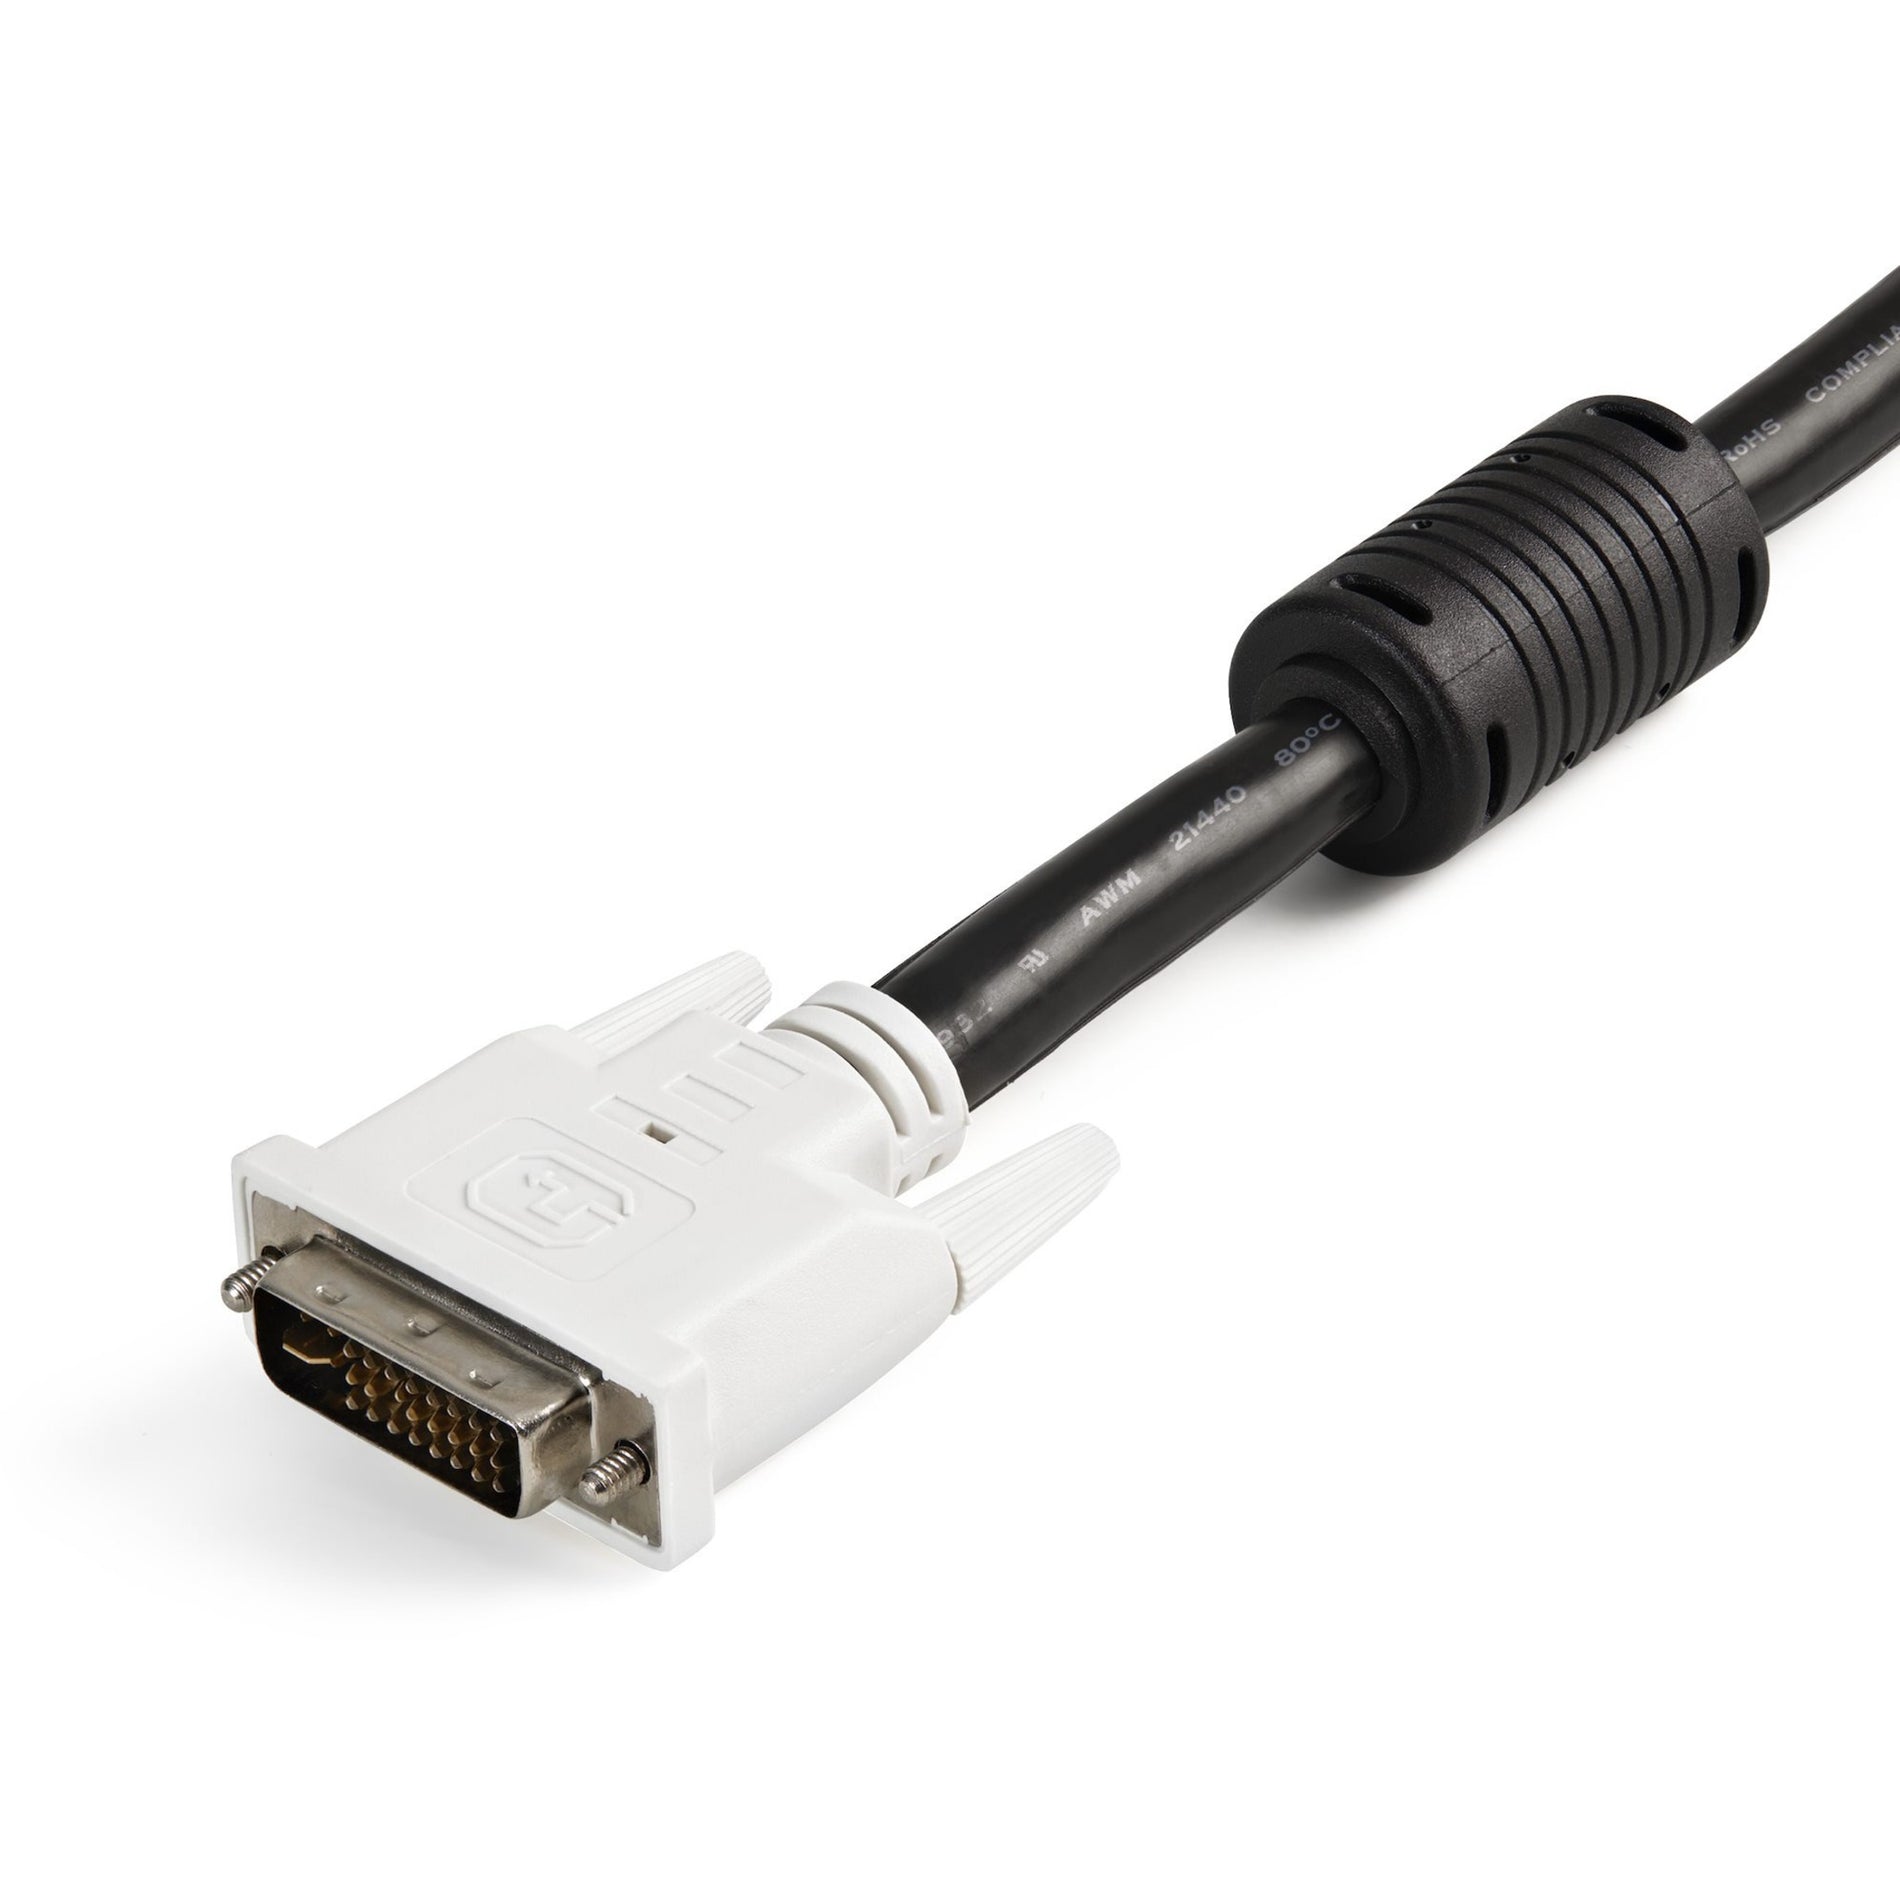 StarTech.com USBDVI4N1A6 6 ft 4-in-1 USB DVI KVM Cable with Audio and Microphone, Convenient Connectivity for Keyboard, Mouse, and KVM Switch